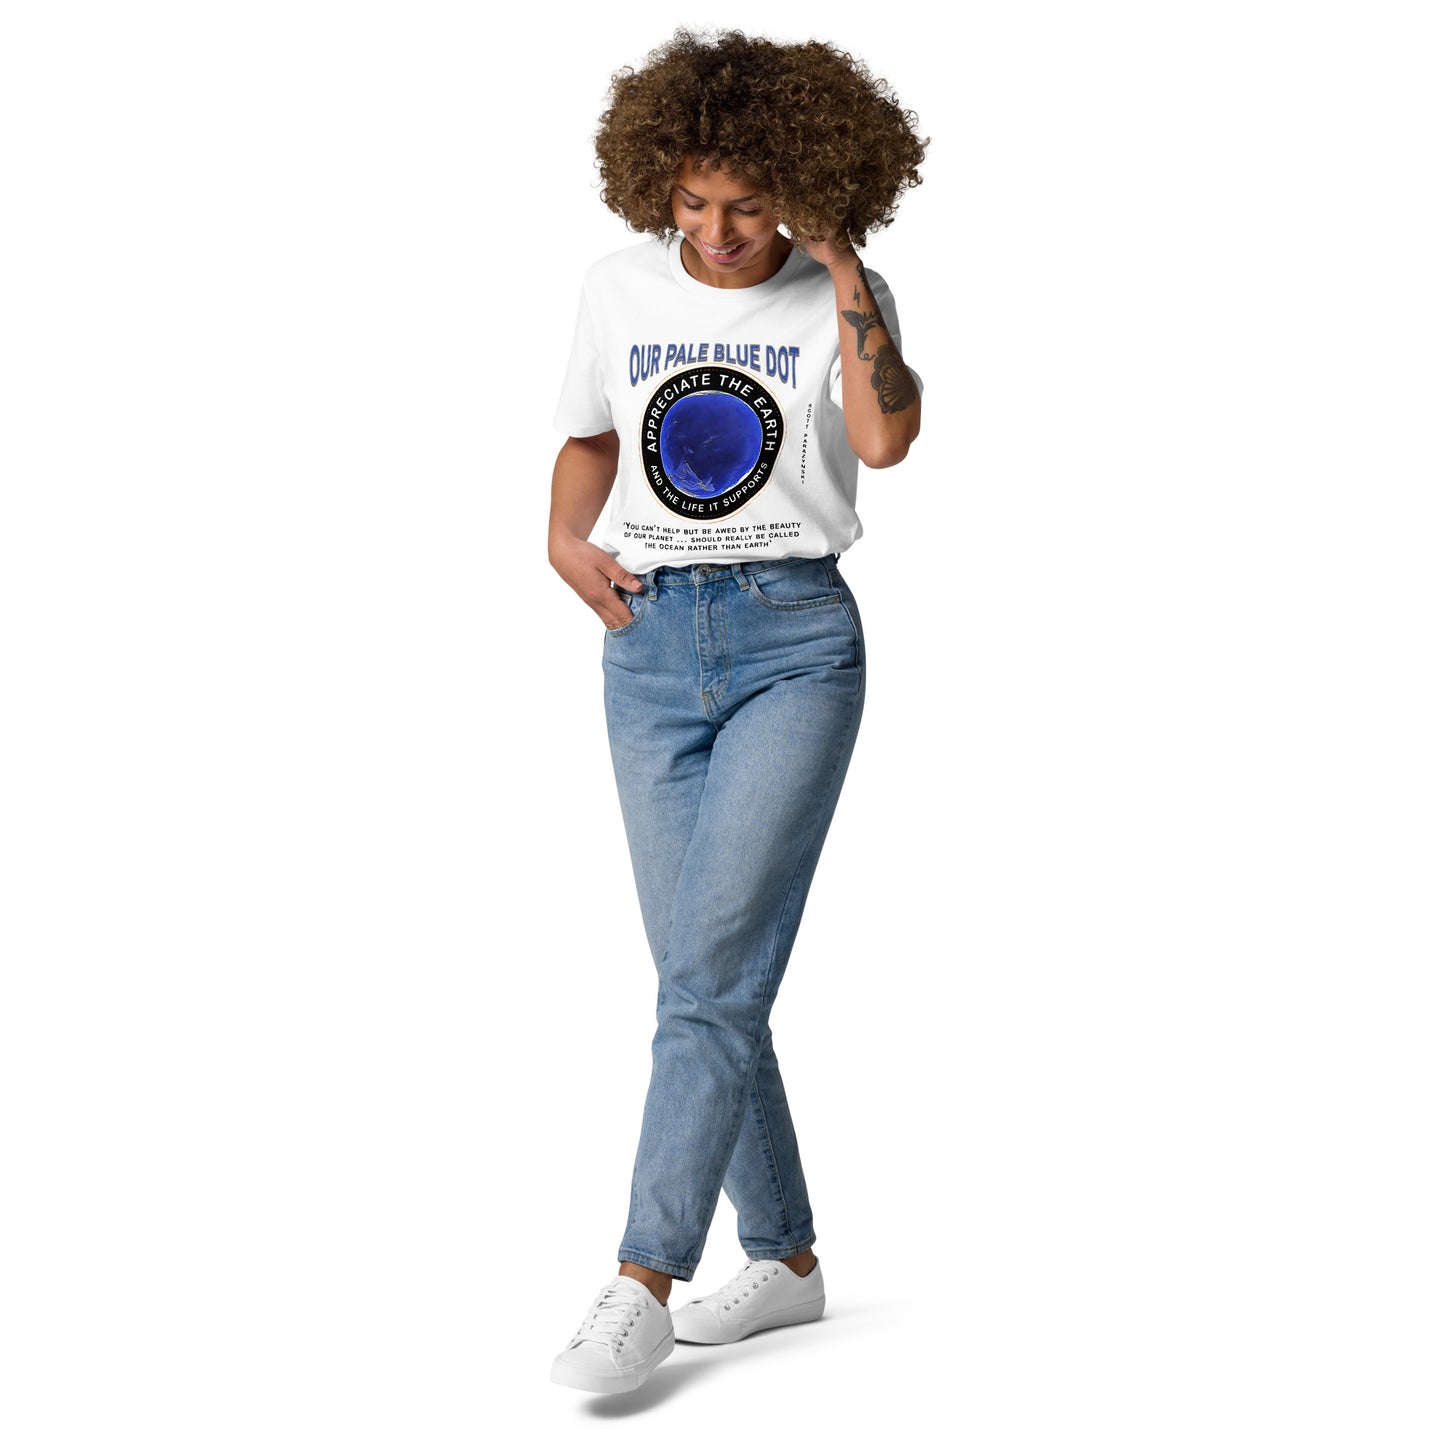 Unisex organic cotton t-shirt Appreciate Our Earth (Scott Parazynski) & The Life It Supports